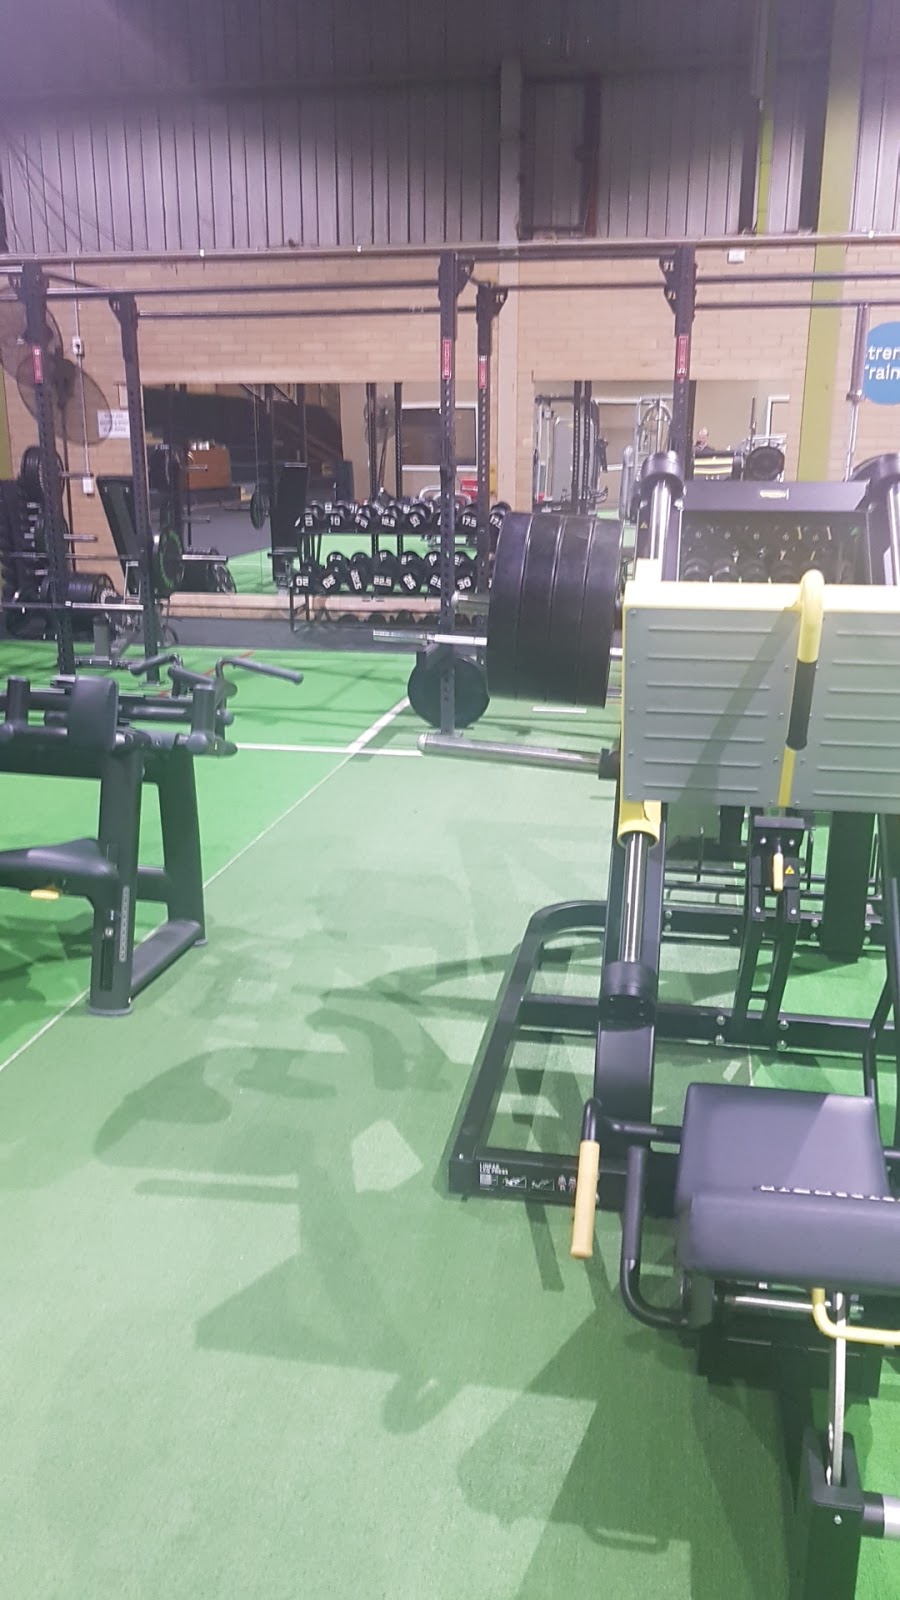 Stawell Sports and Aquatic Centre | gym | 49/51 Houston St, Stawell VIC 3380, Australia | 0353580550 OR +61 3 5358 0550